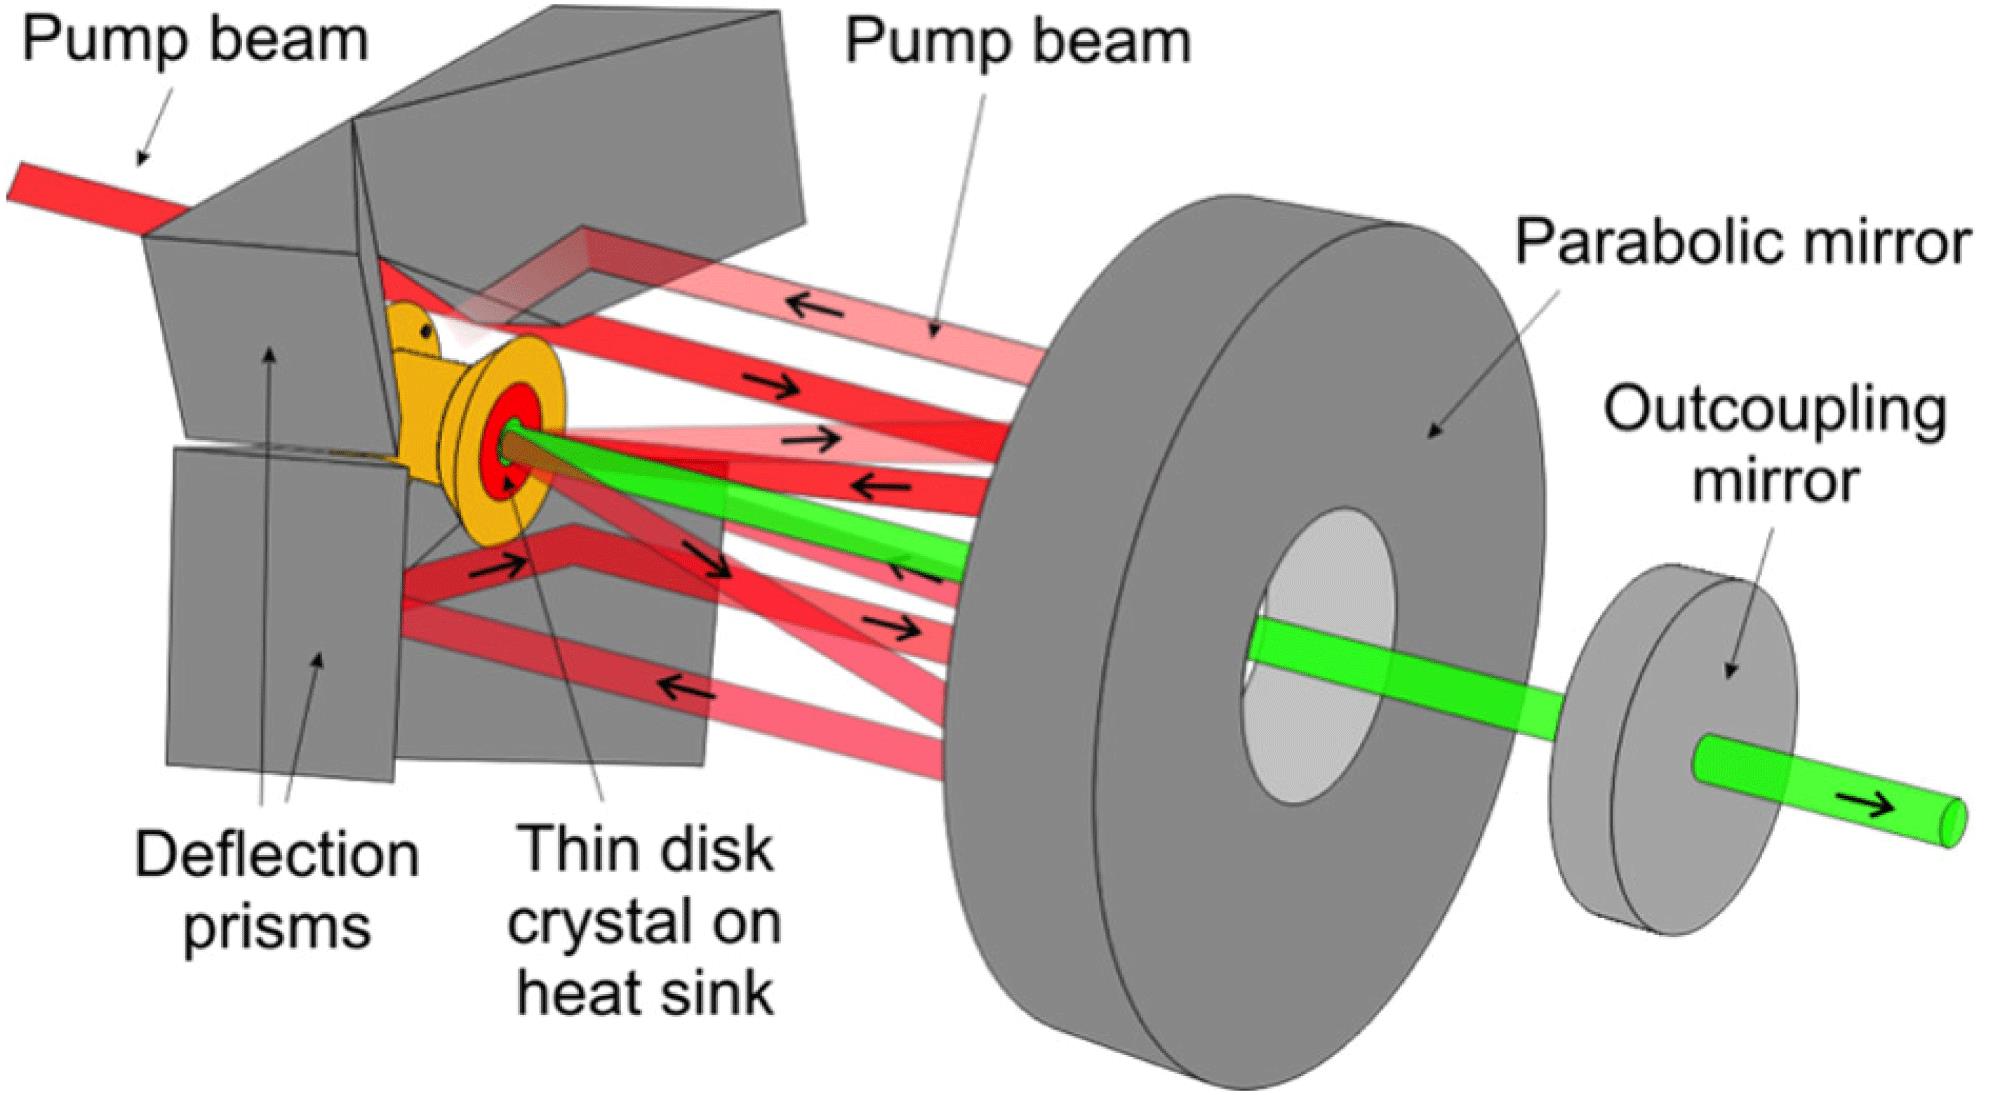 Schematic of the thin-disk cavity consisting of a parabolic mirror focusing the pump beam onto the thin-disk crystal. Multiple passes of the pump beam are made by means of deflection prisms. The cavity for laser beam extraction is formed by the thin-disk crystal and the outcoupling mirror [14].